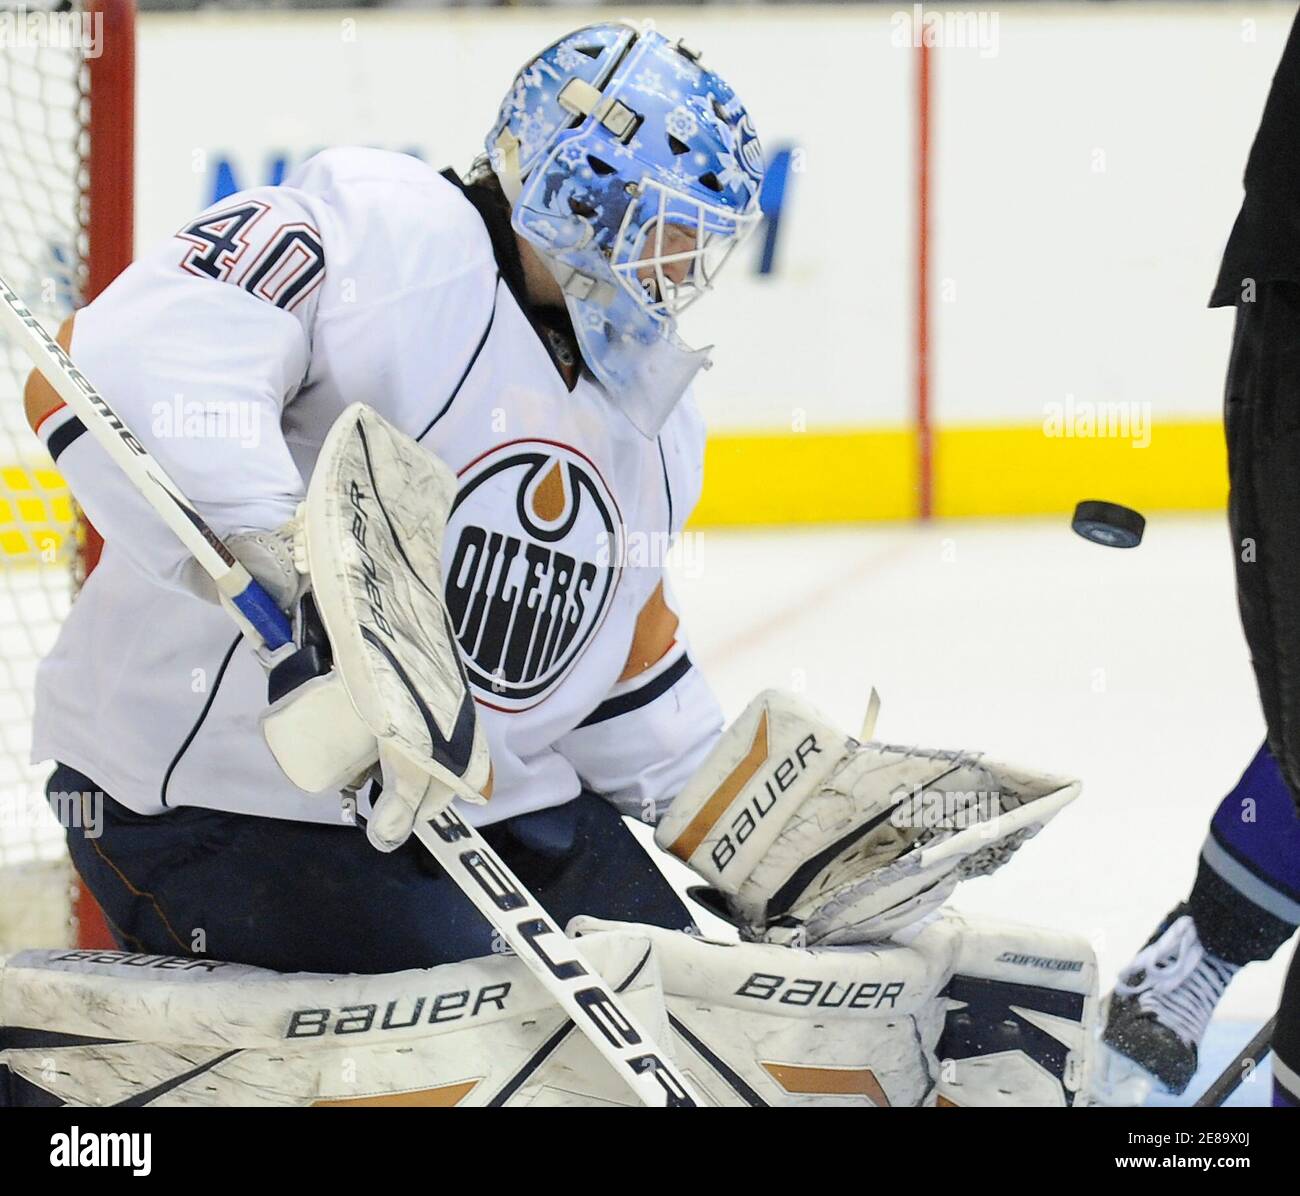 Edmonton Oilers goaltender Devan Dubnyk blocks a shot during the second period of an NHL hockey game against the Los Angeles Kings in Los Angeles, California, April 10, 2010. The Oilers won 4-3. REUTERS/Gus Ruelas (UNITED STATES - Tags: SPORT ICE HOCKEY) Stock Photo